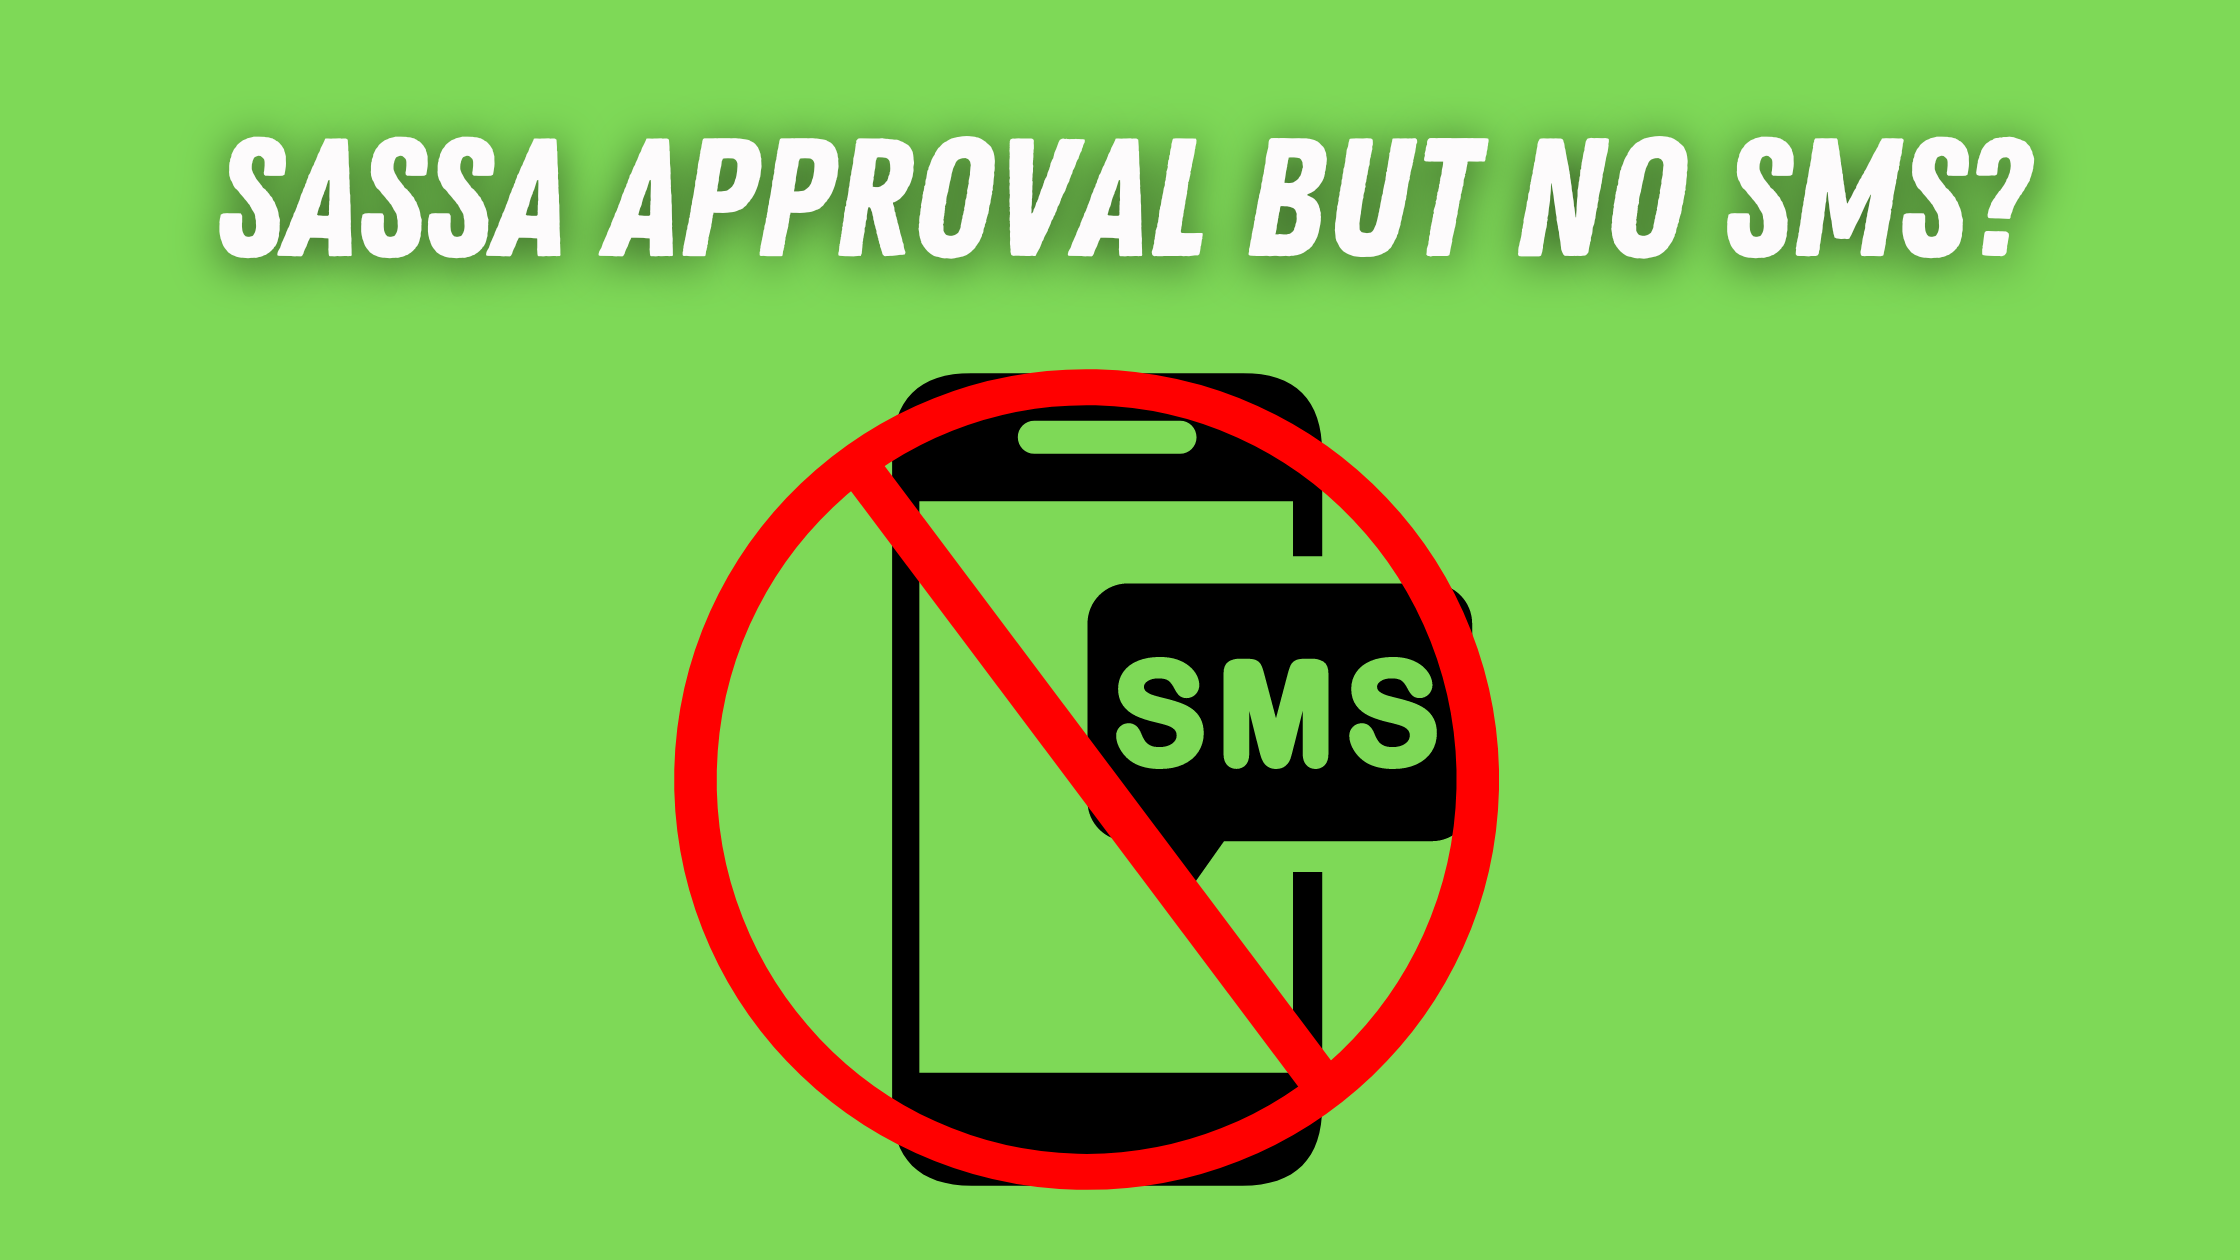 SASSA APPROVAL BUT NO SMS?